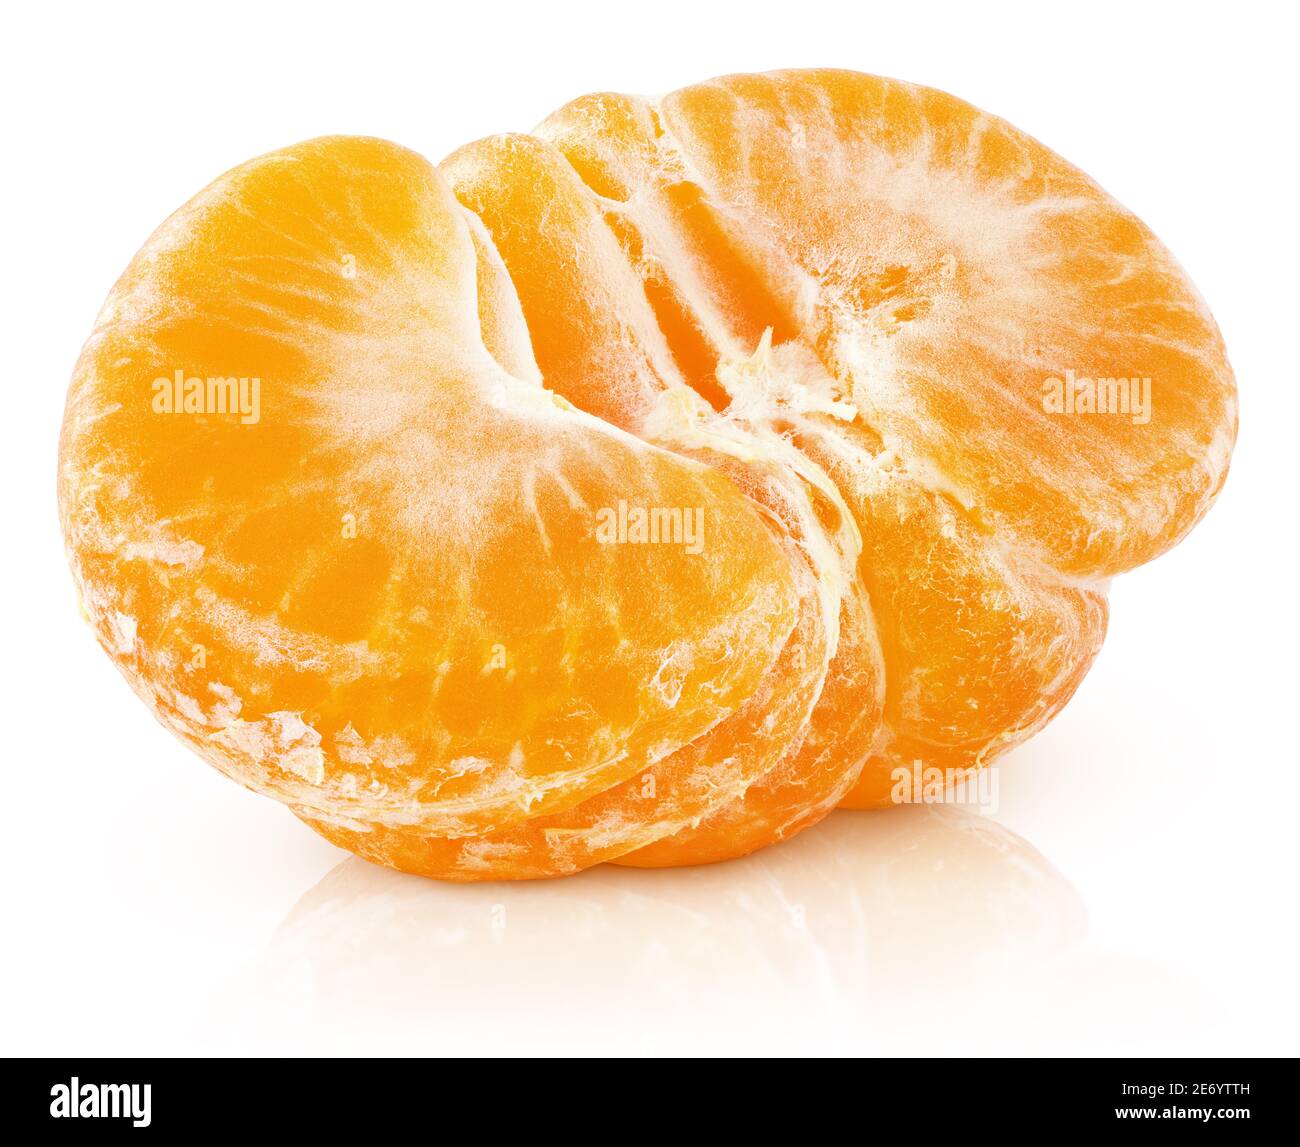 Ripe half of peeled mandarin or orange citrus fruit isolated on white background with clipping path. Full depth of field. Stock Photo